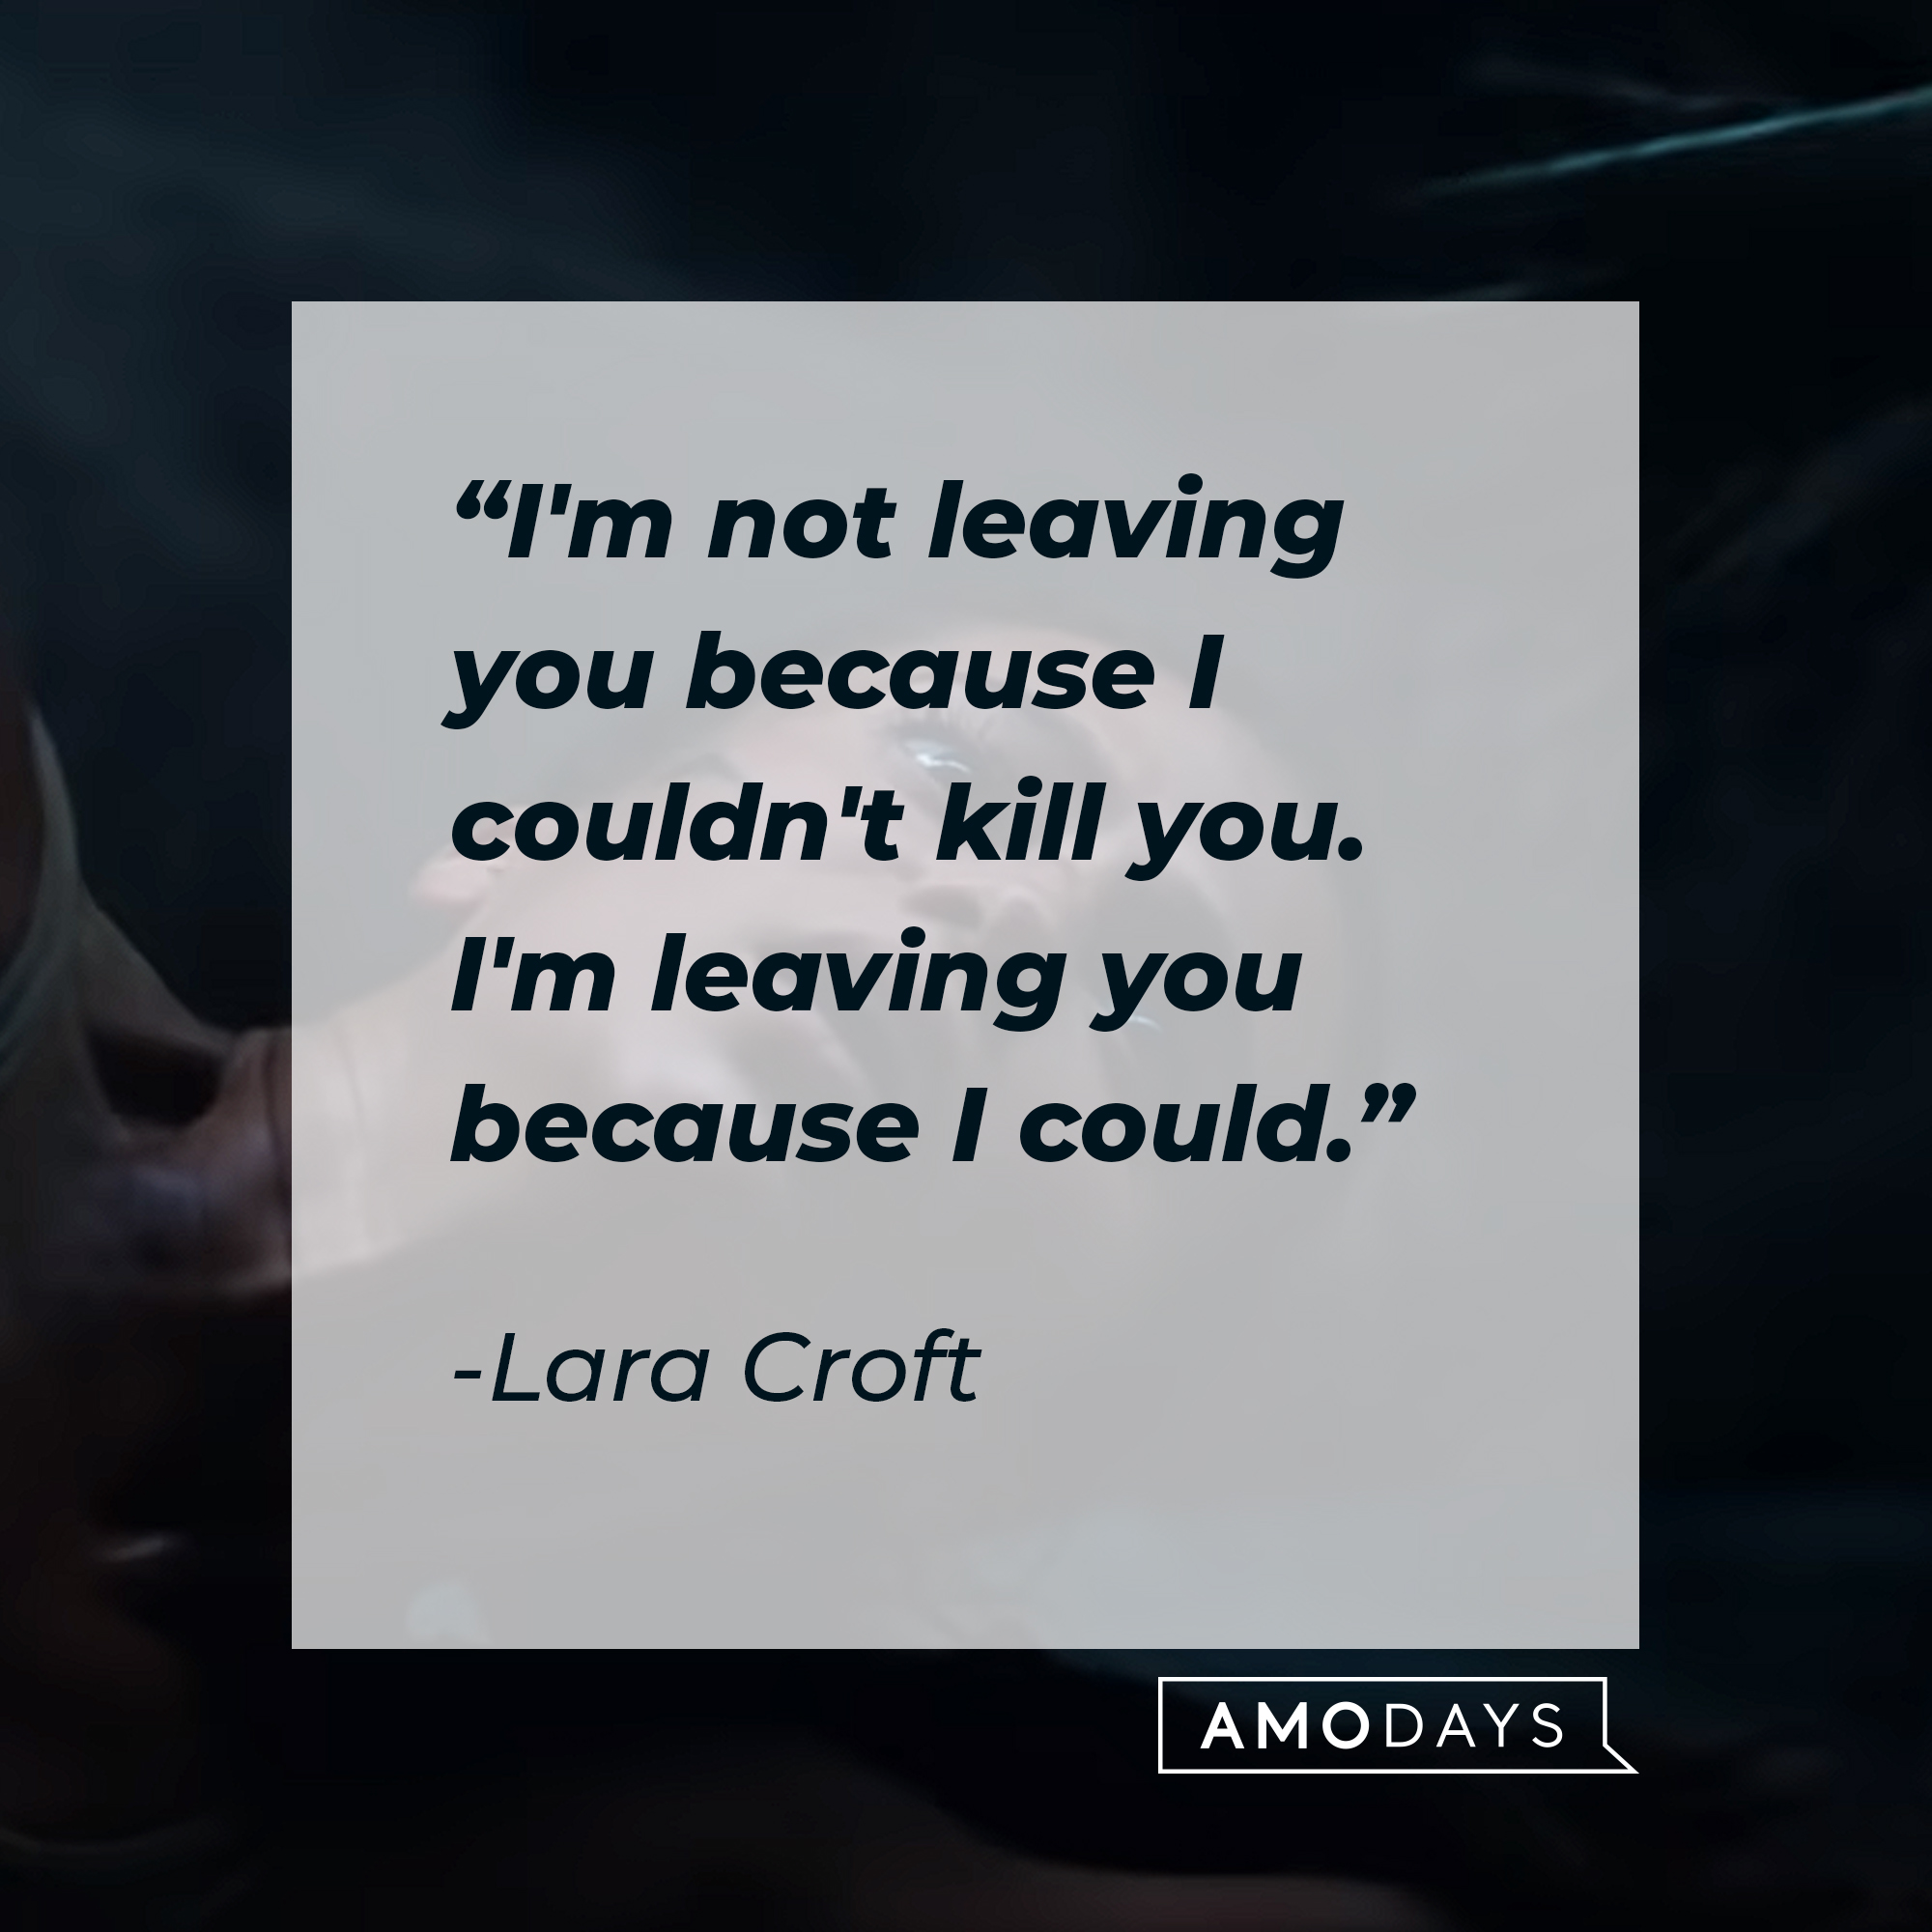 An image of Alicia Vikander’s Lara Croft with a Lara Croft quote: “I'm not leaving you because I couldn't kill you. I'm leaving you because I could.” | Source: youtube.com/WarnerBrosPictures